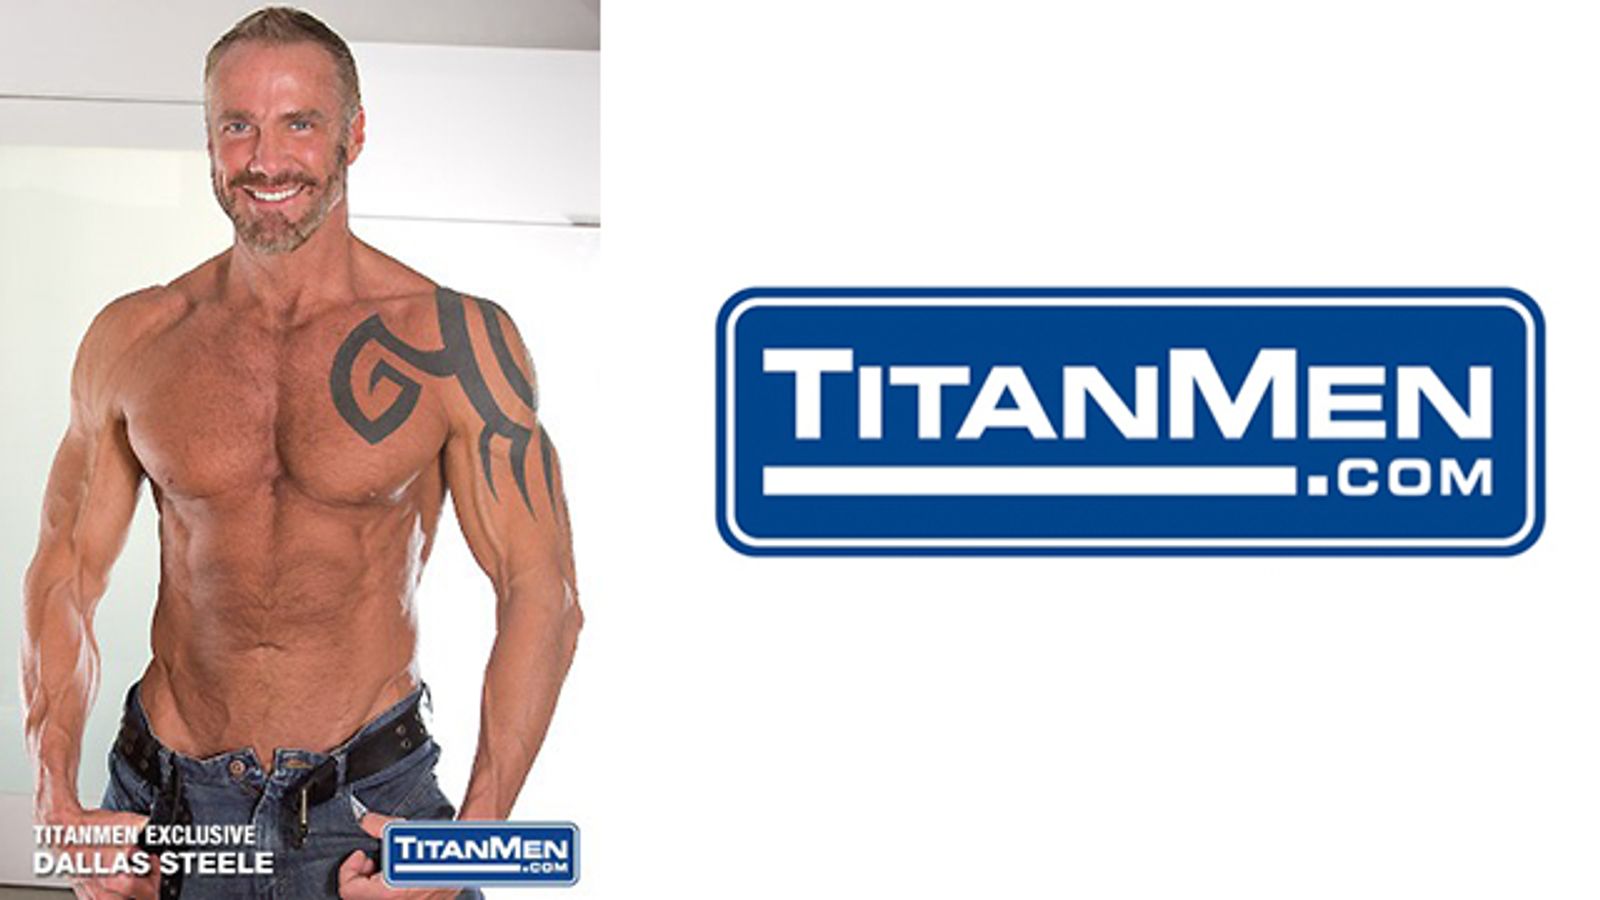 TitanMen Signs Dallas Steele as Newest Exclusive Performer